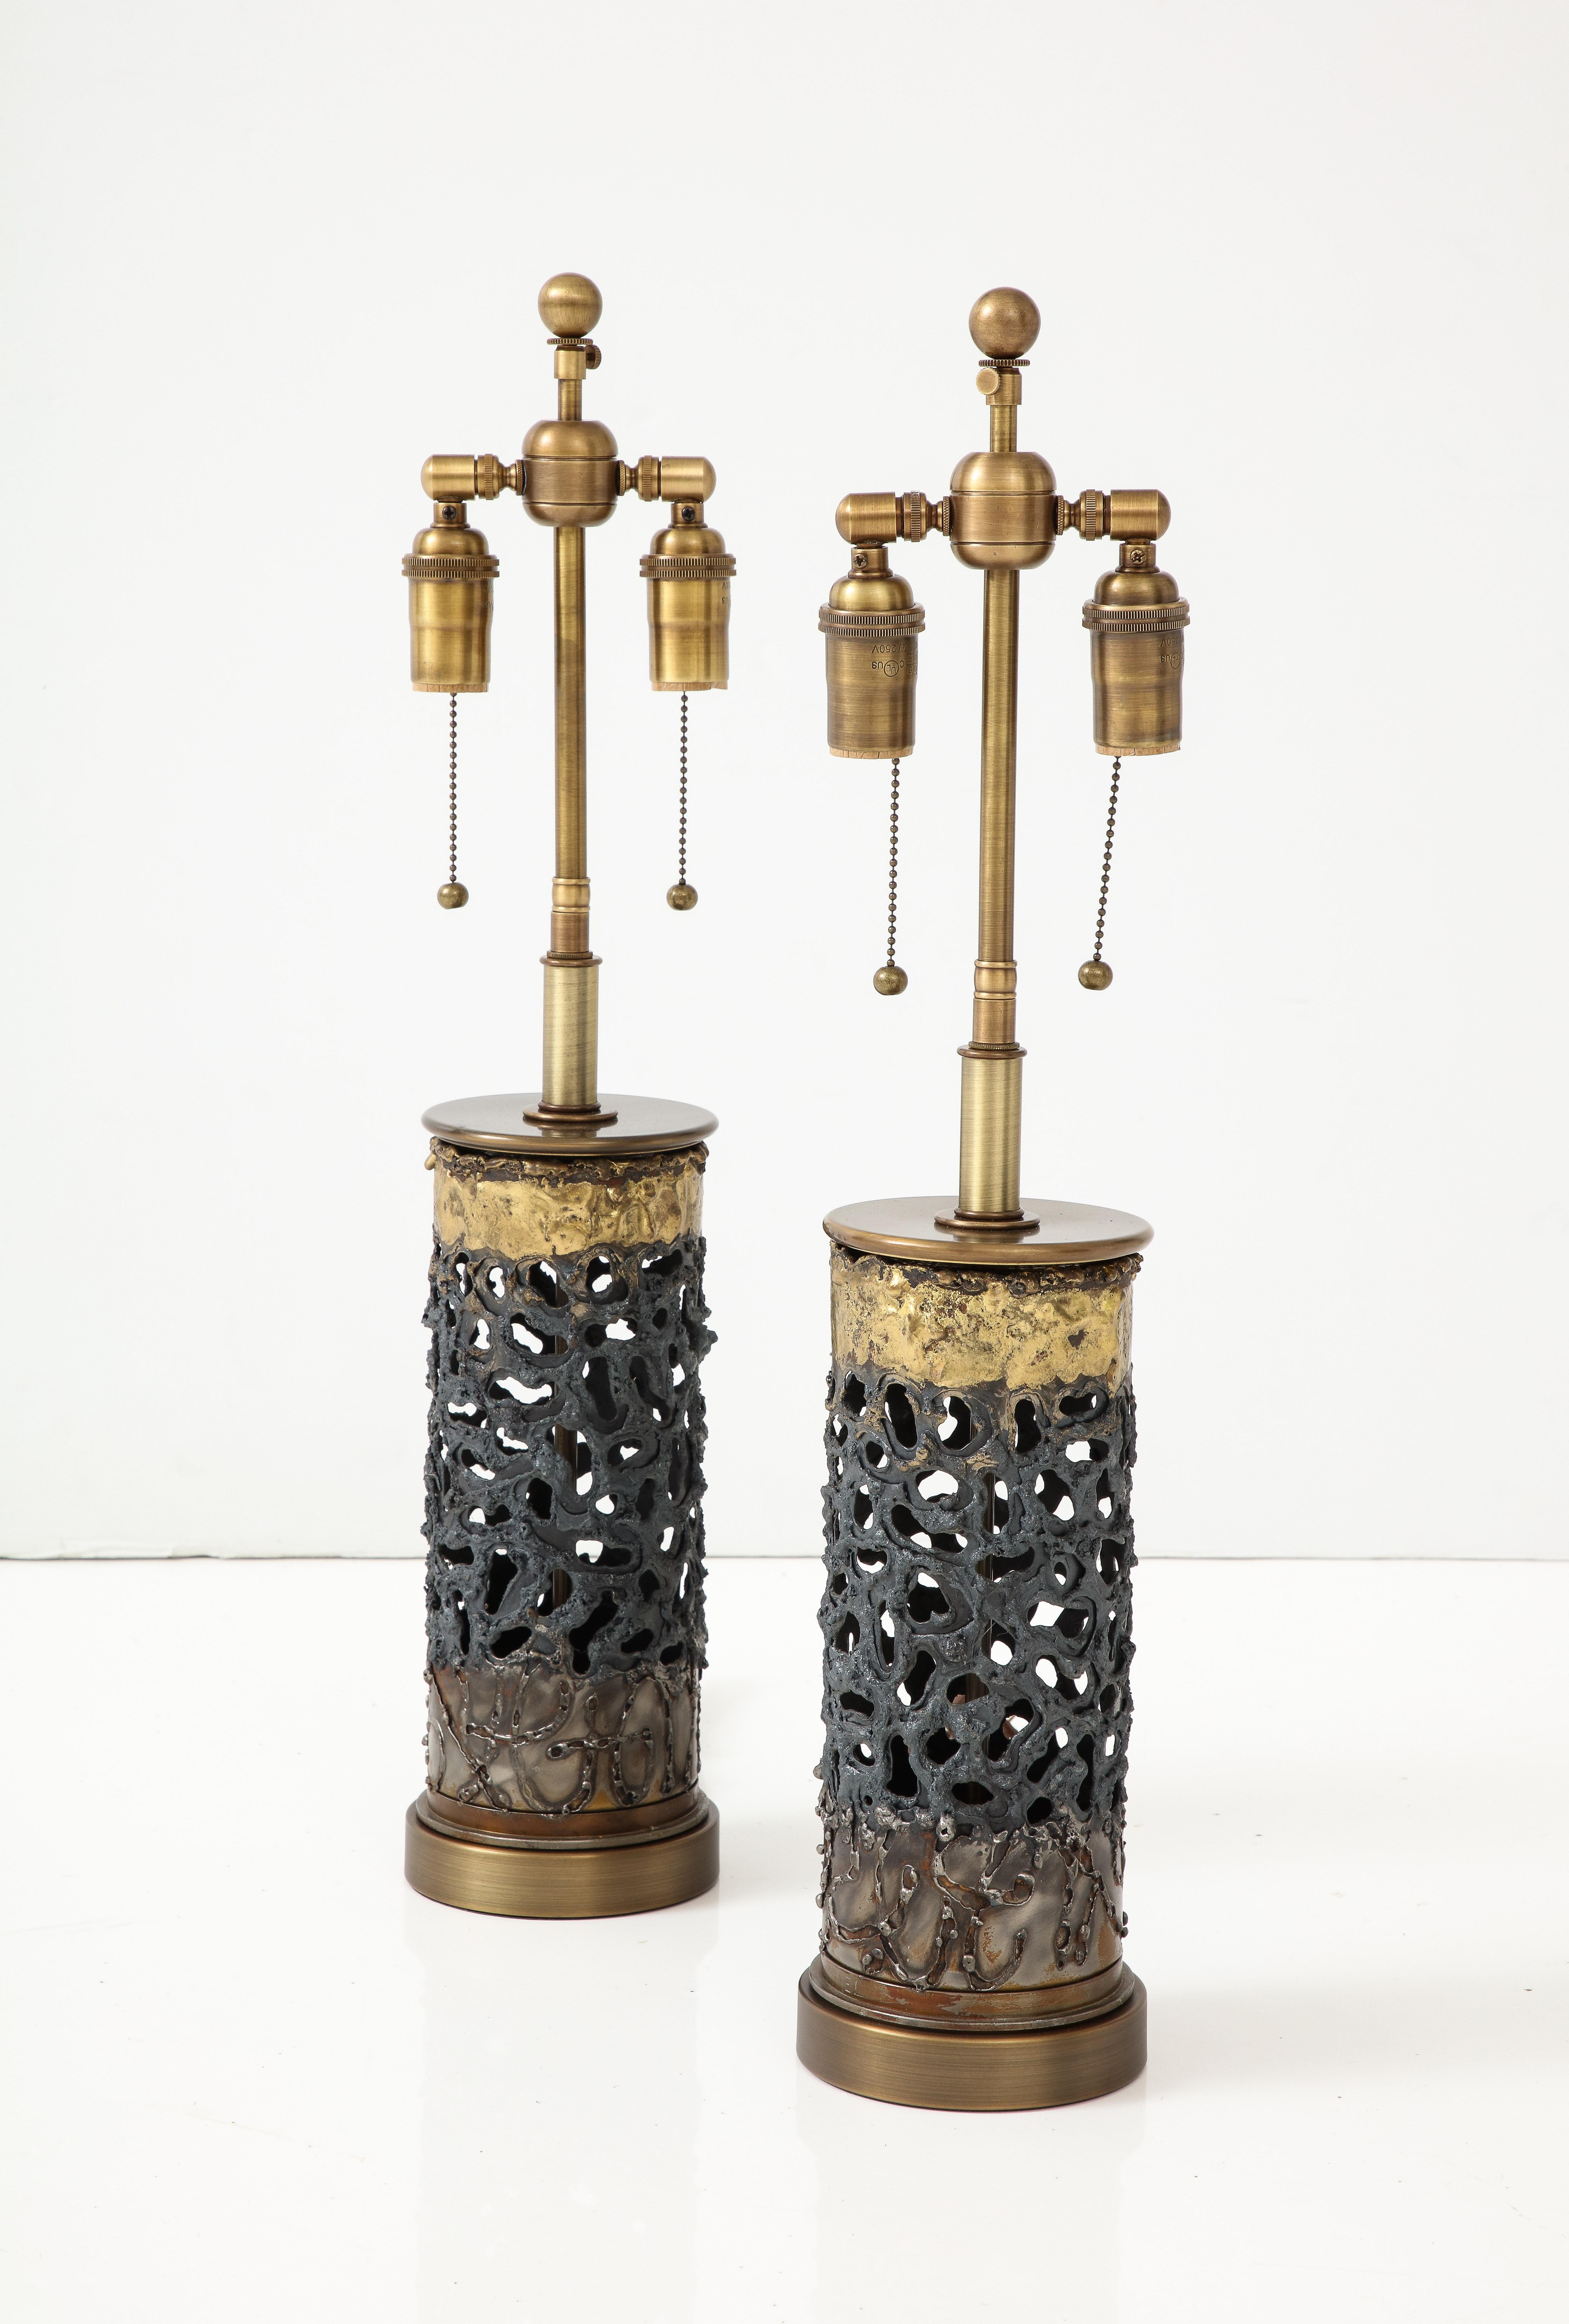 Pair of 1970's Brutalist Lamps.
The Brutalist column form lamp bodies have a n irregular pierced design,
and are finished in Bronze and Brass tones.
The lamps have been Newly rewired with adjustable Antique brass double clusters
that take standard